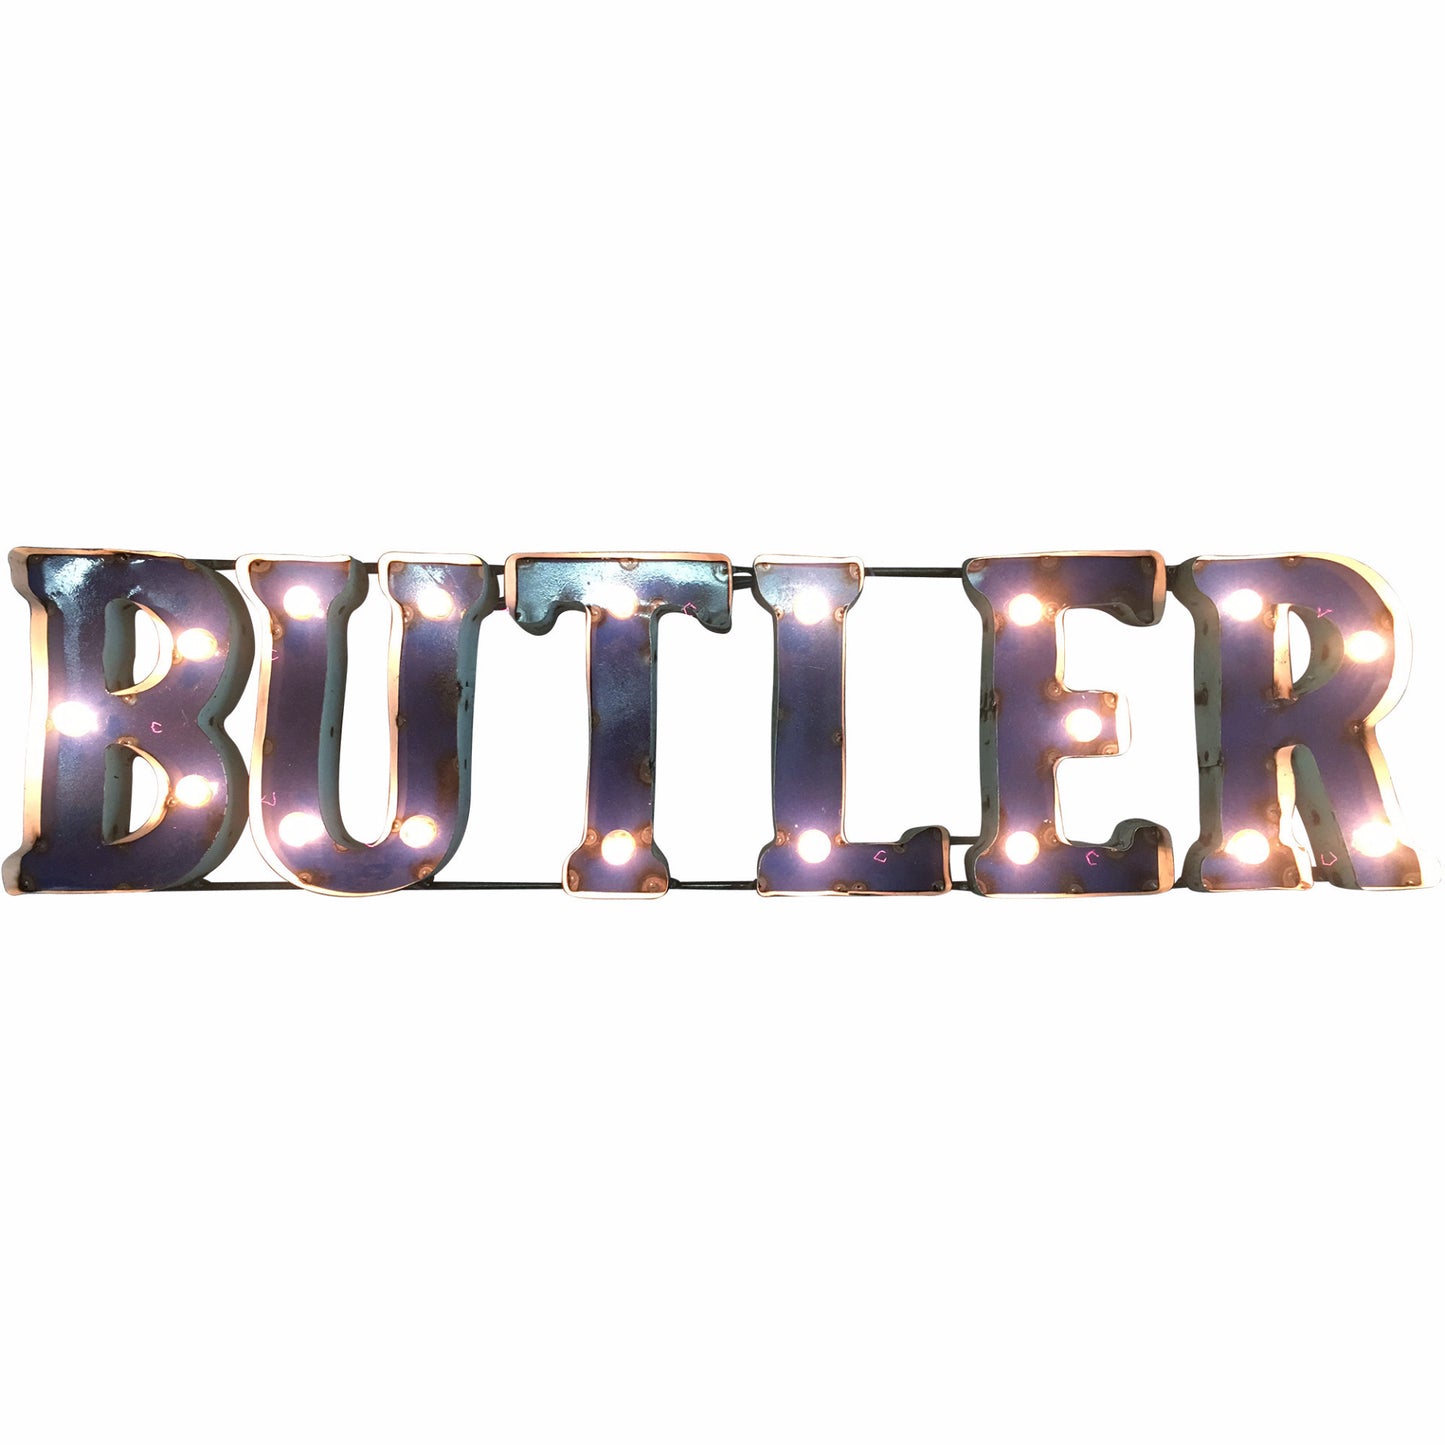 Butler University "Butler" Lighted Recycled Metal Wall Decor